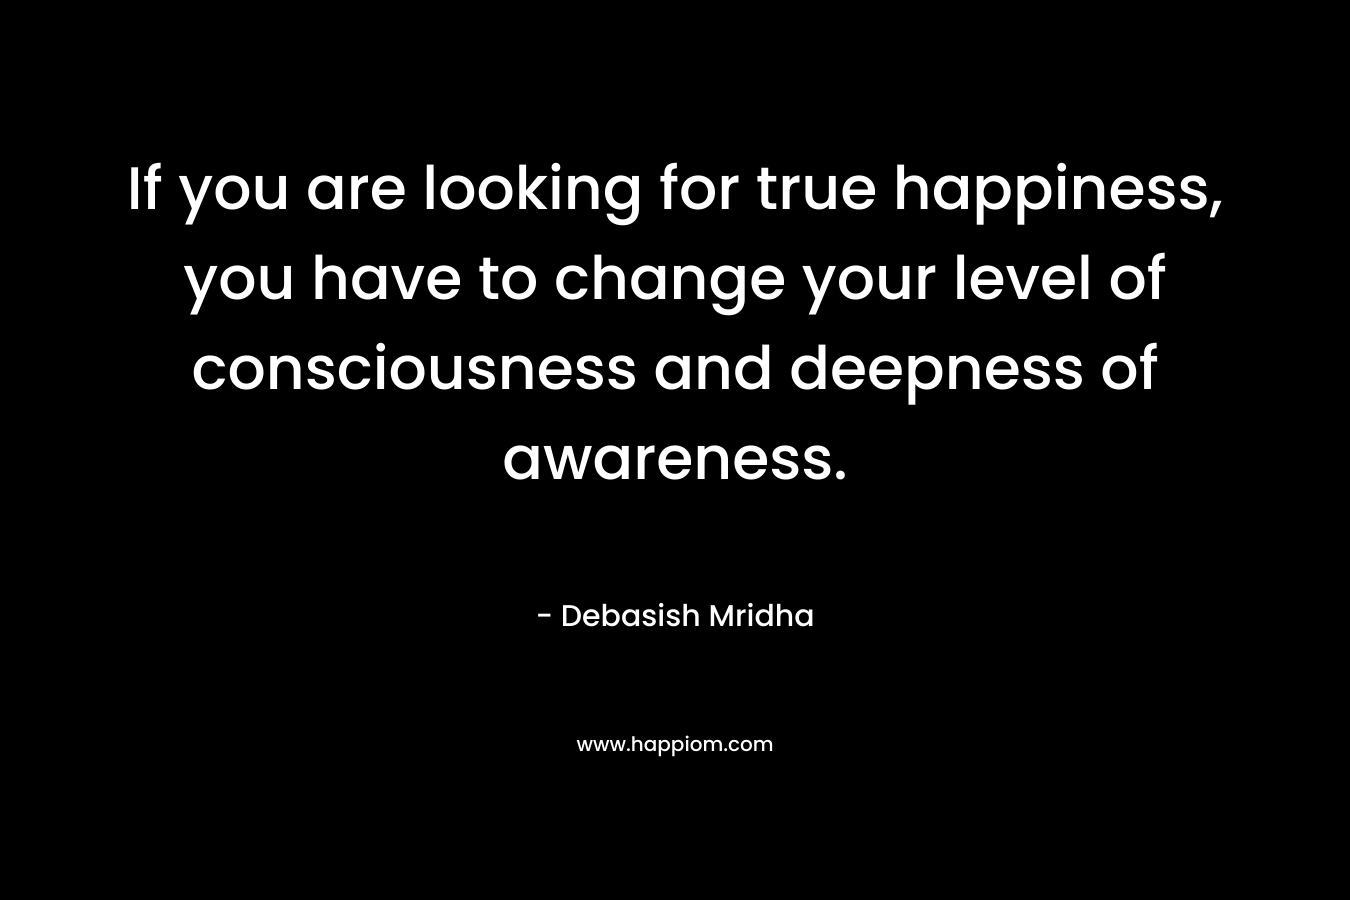 If you are looking for true happiness, you have to change your level of consciousness and deepness of awareness.